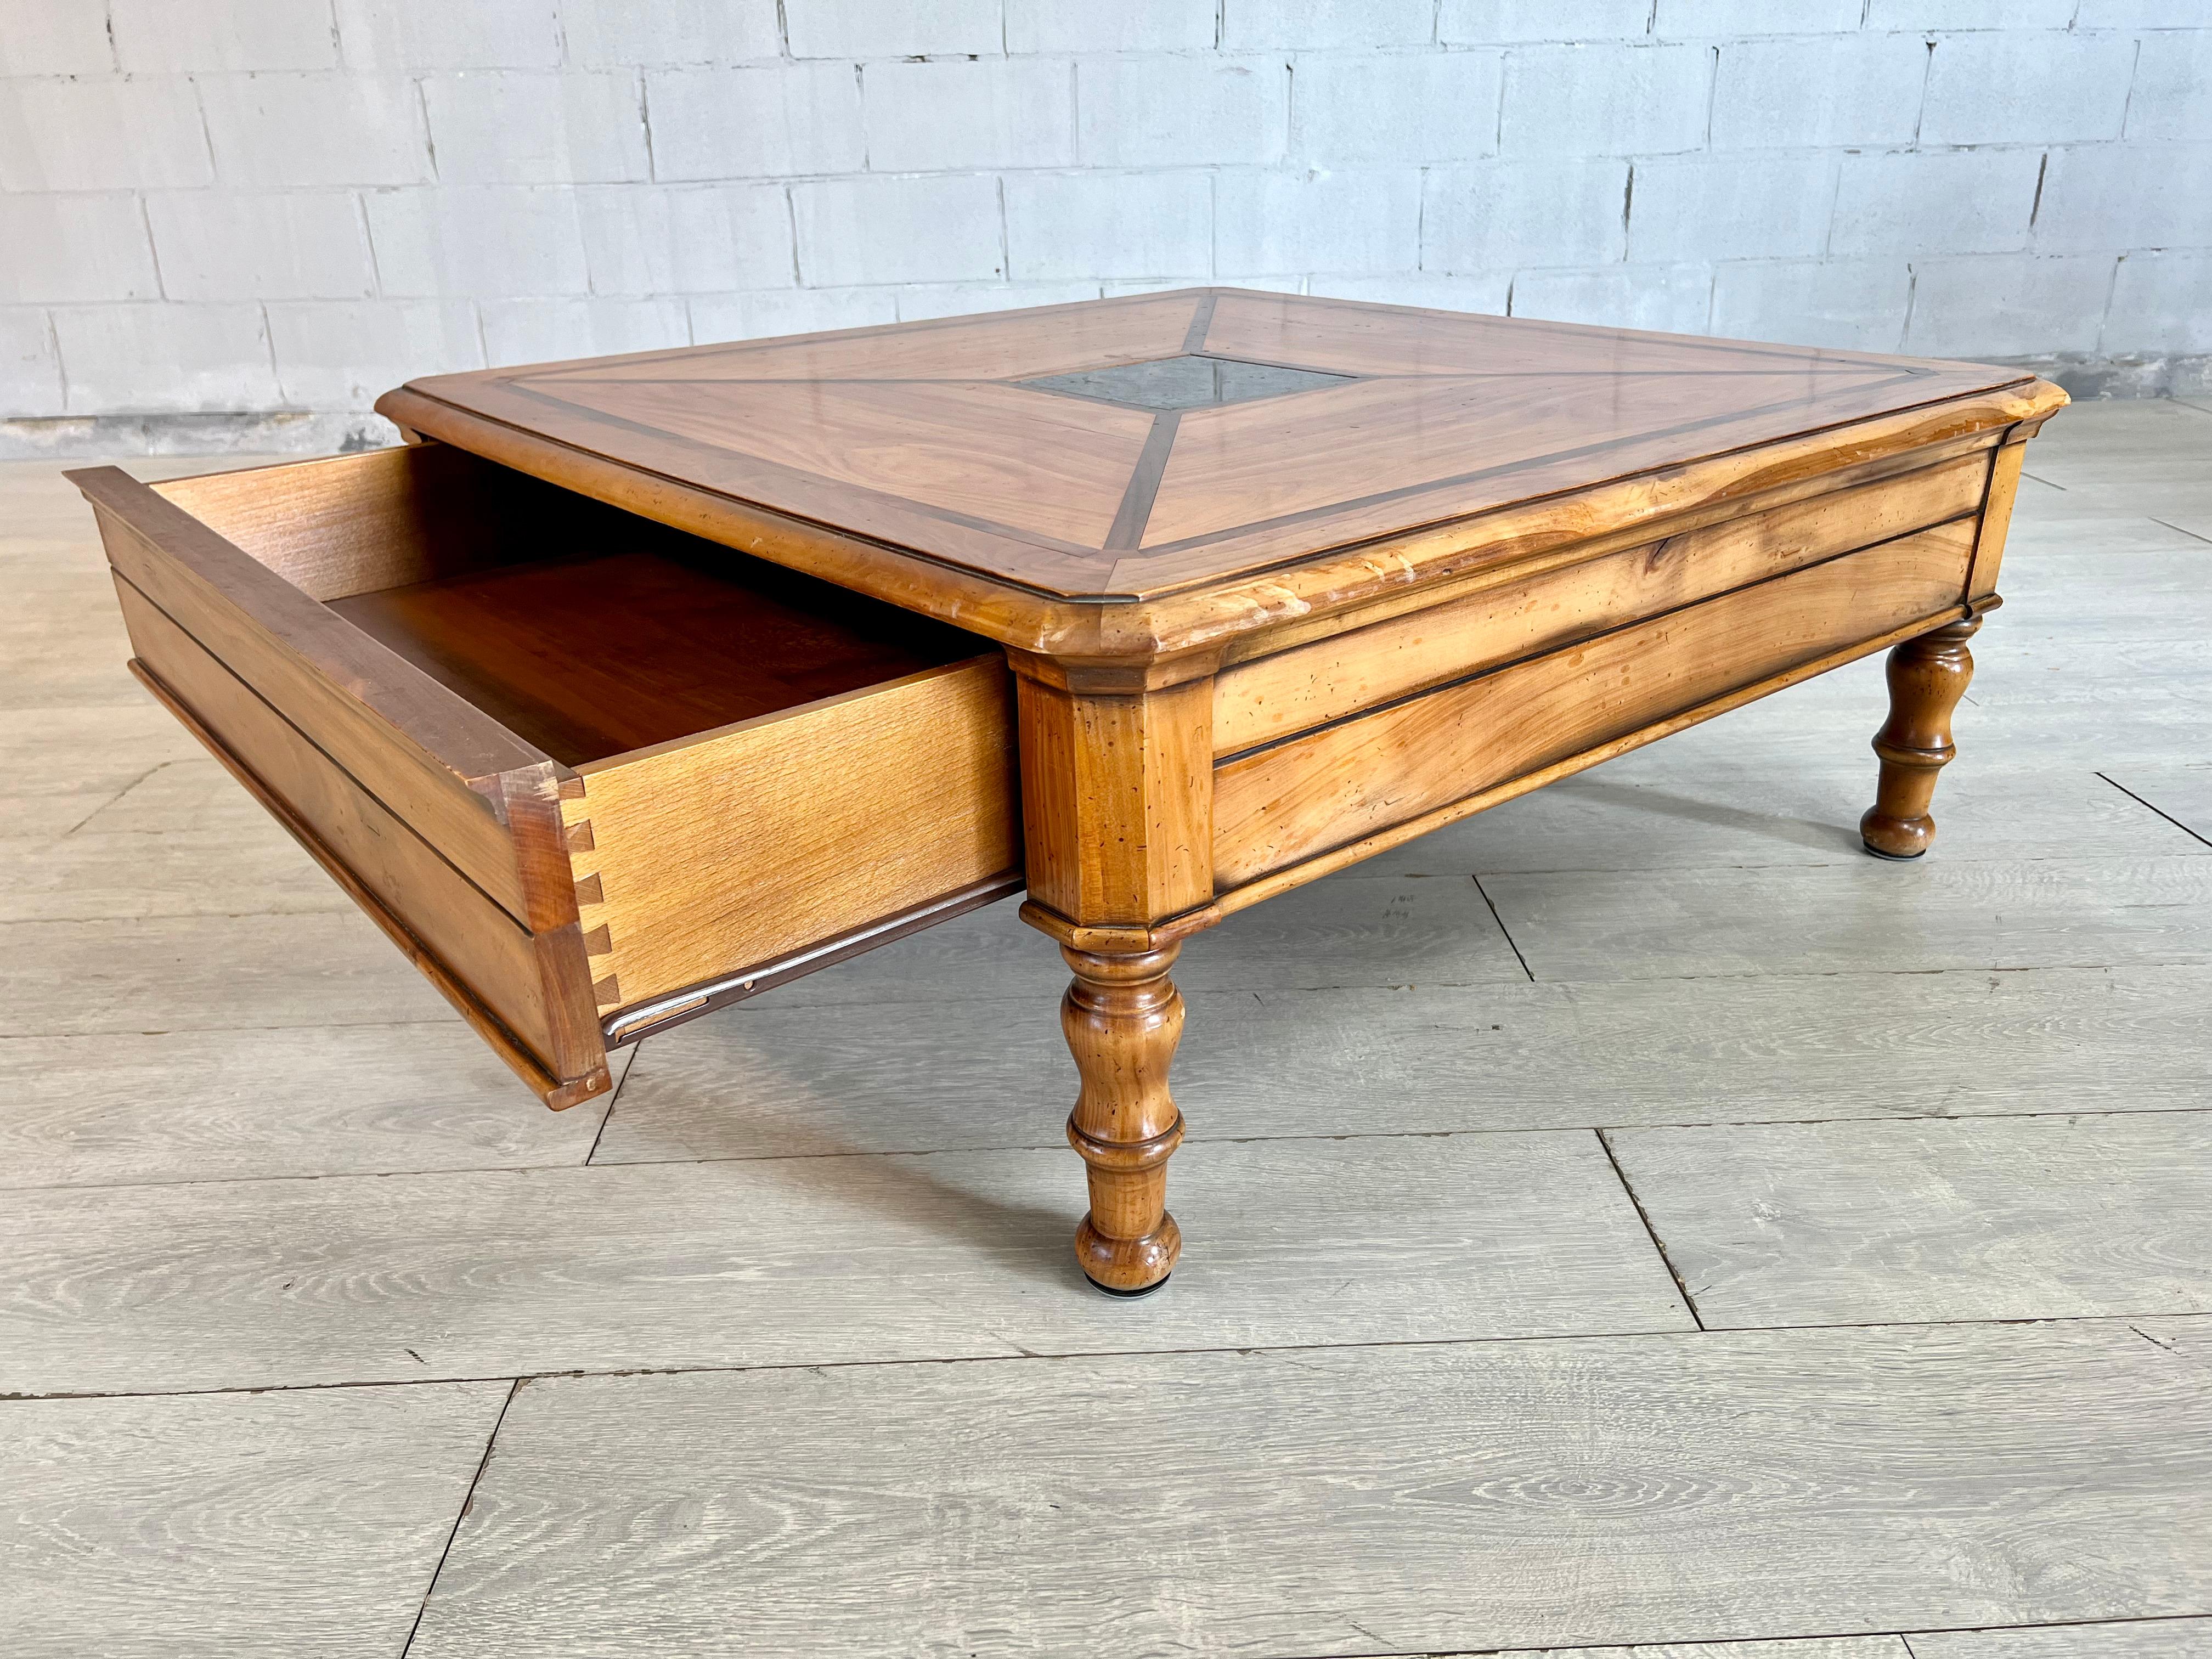 Intricate Swiss Square Coffee Table With Geometric Design and Marble Inlay In Good Condition For Sale In Bridgeport, CT